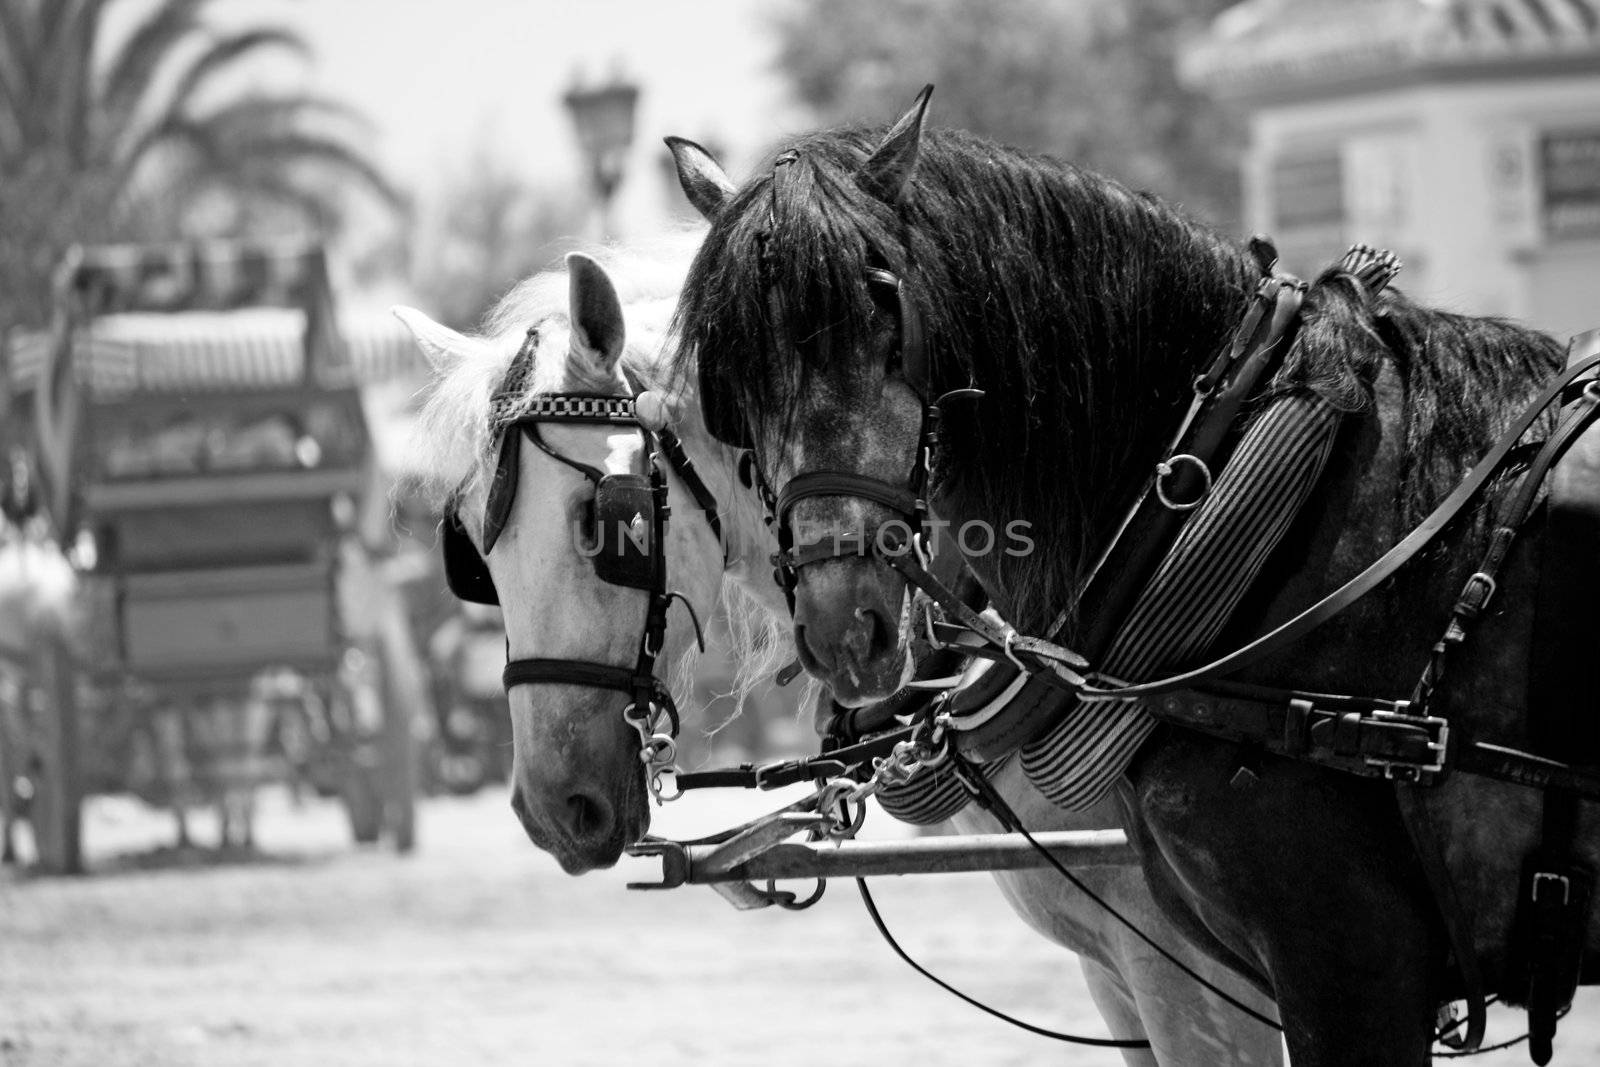 View of two horses watching the camera on the El Rocio festivity on Spain.